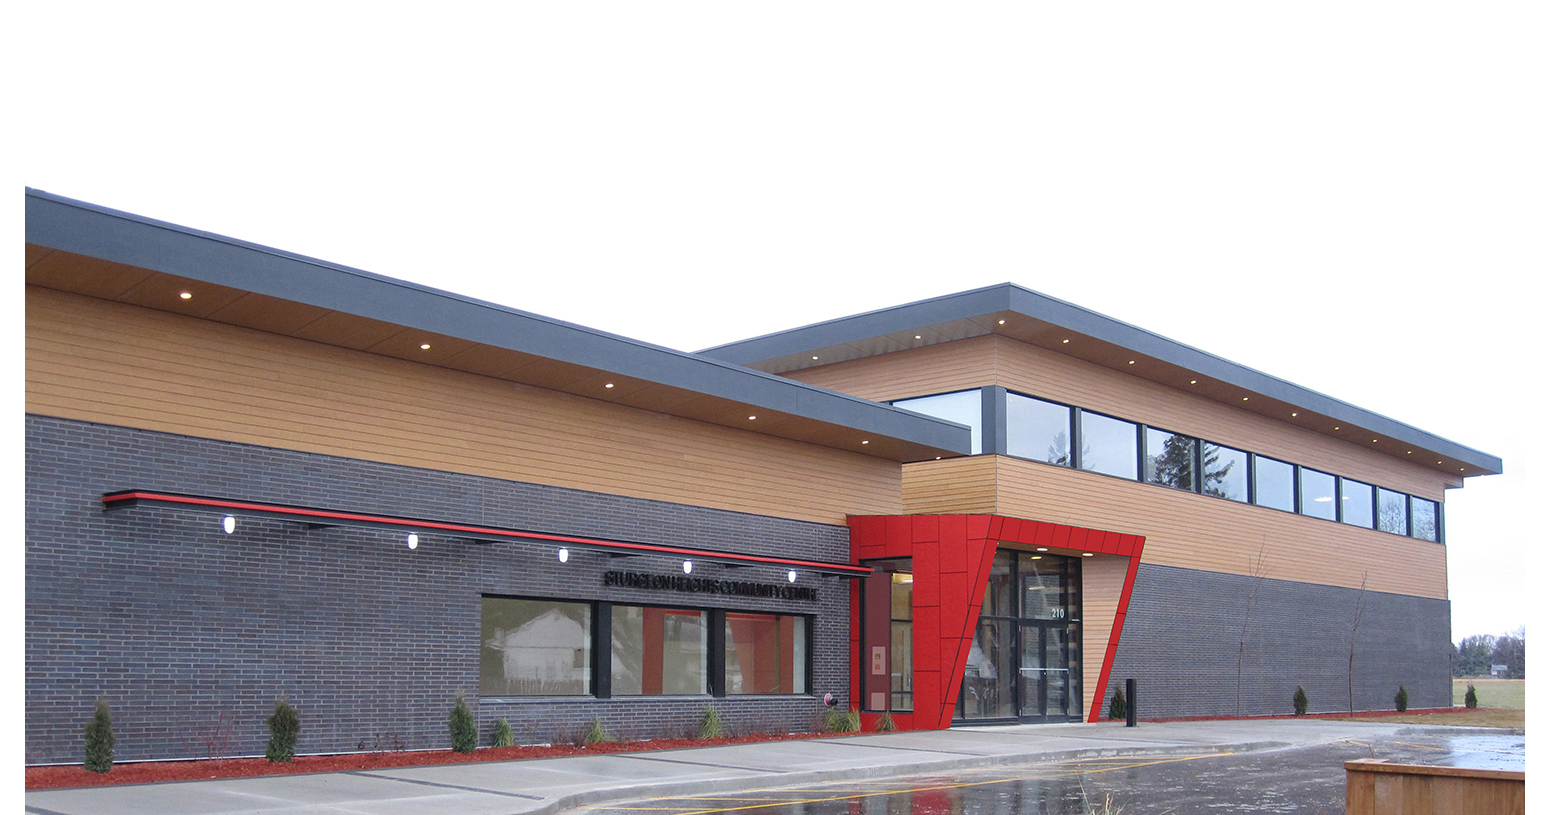  Sturgeon Heights Community Centre, exterior photo of building / Photo: Tracy A Wieler 